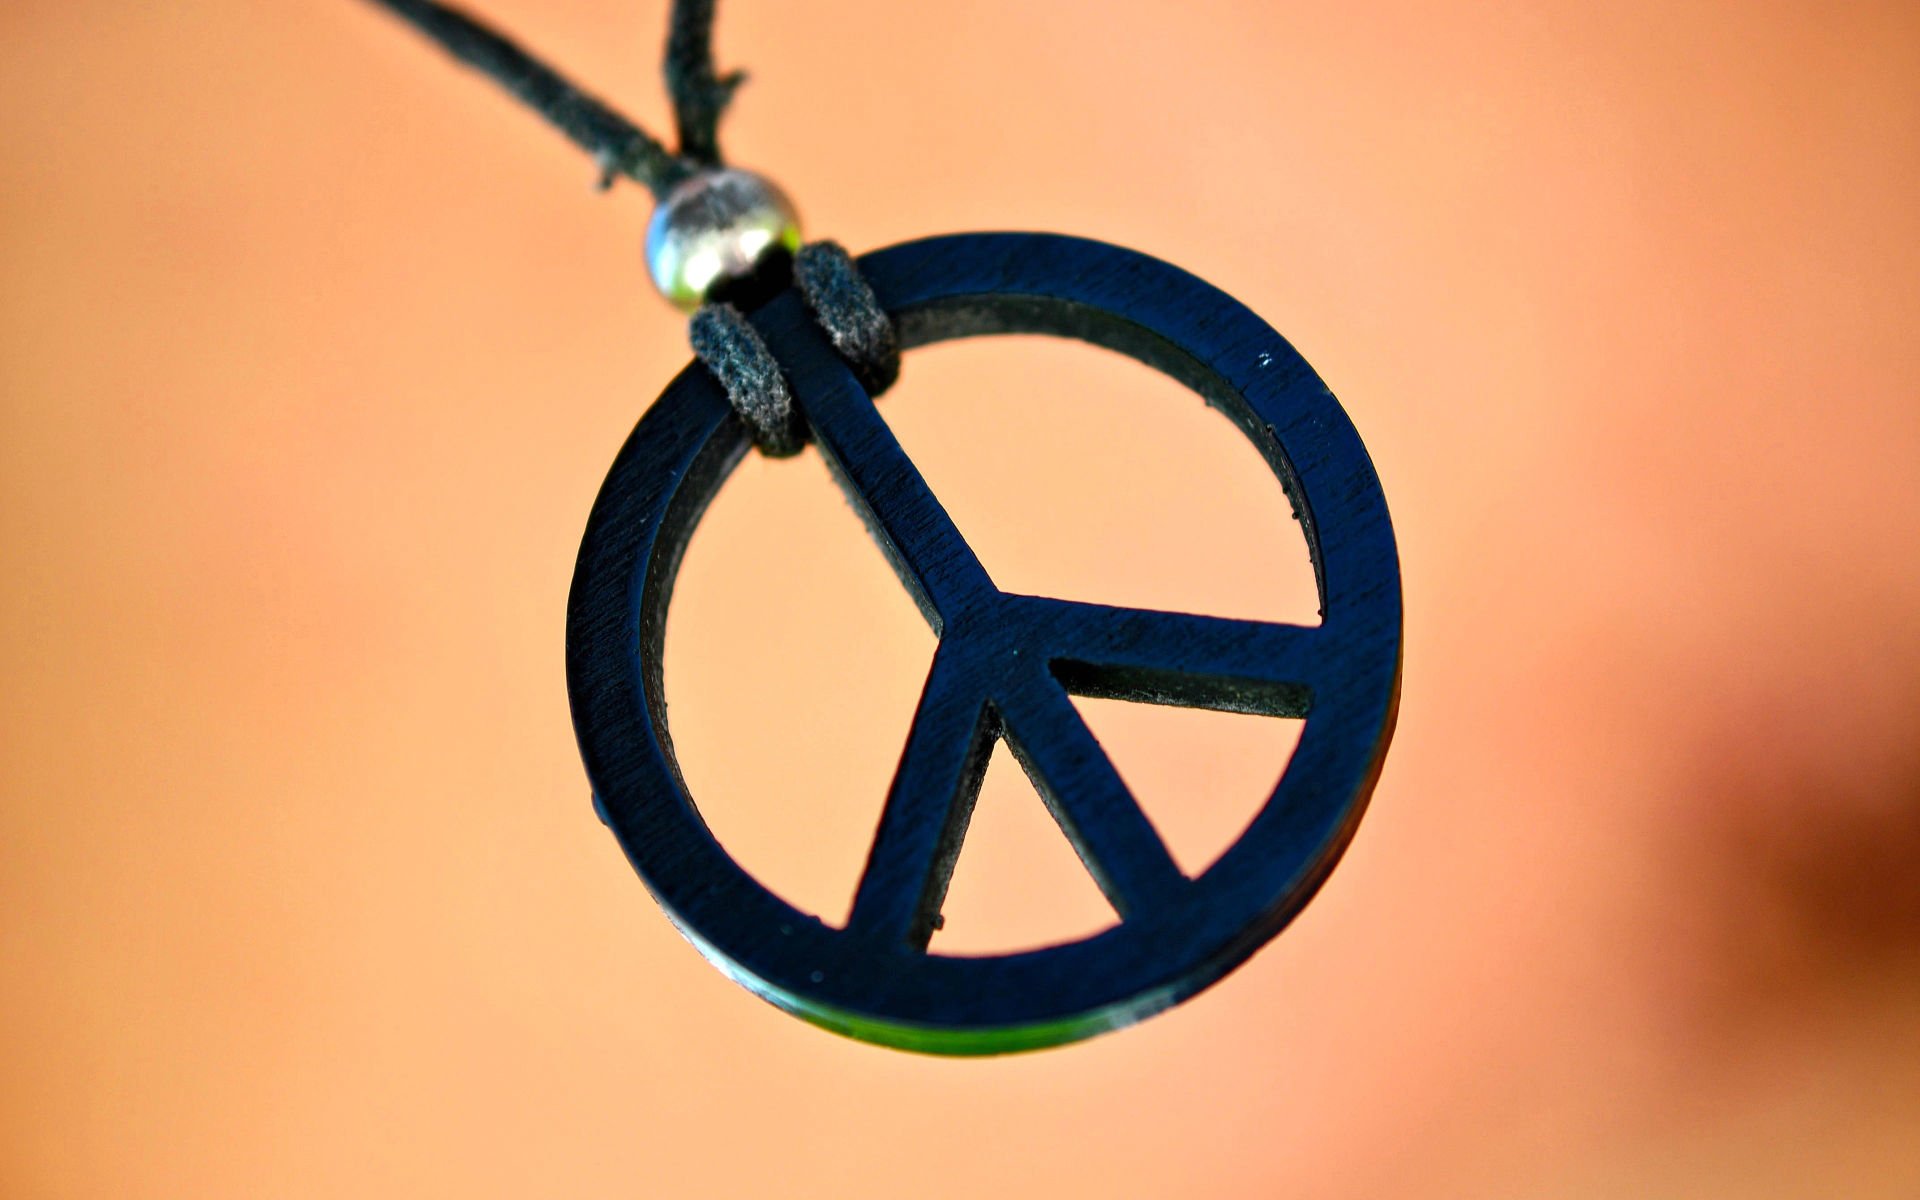 Peace HD Wallpaper Background Image